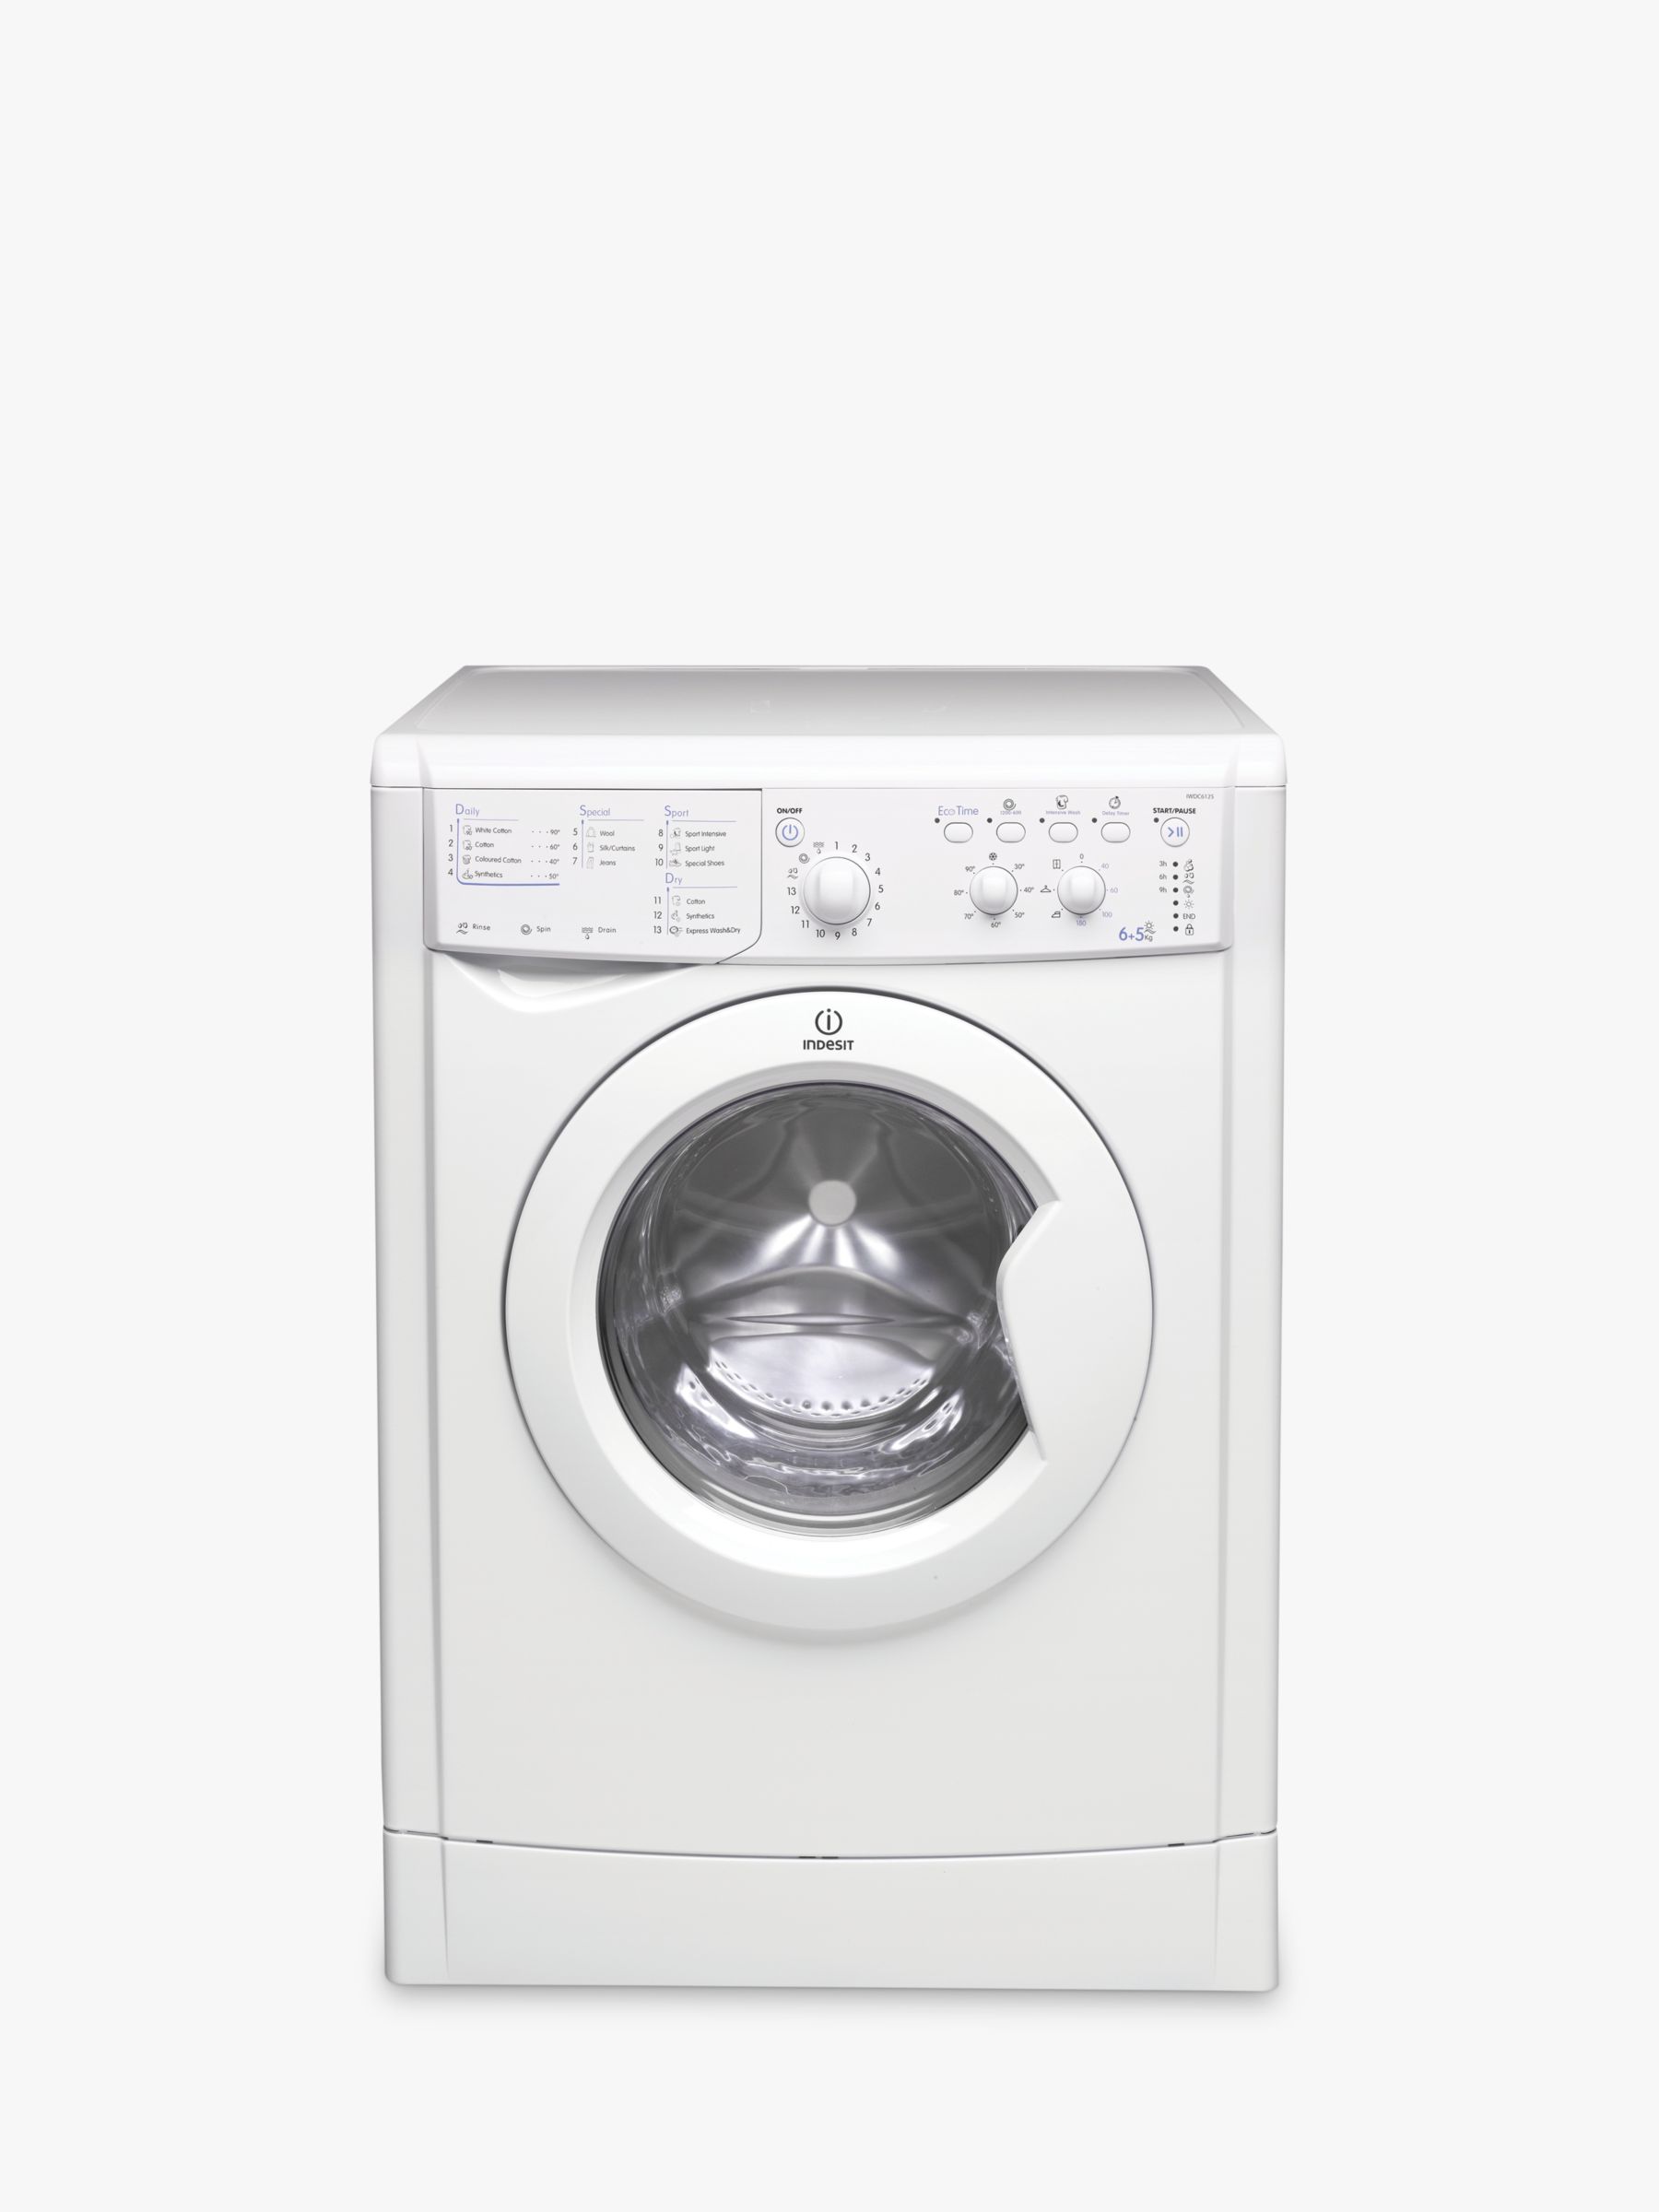 Indesit IWDC6125 Ecotime Washer Dryer, 6kg Wash/5kg Dry Load, B Energy Rating, 1200rpm Spin, White